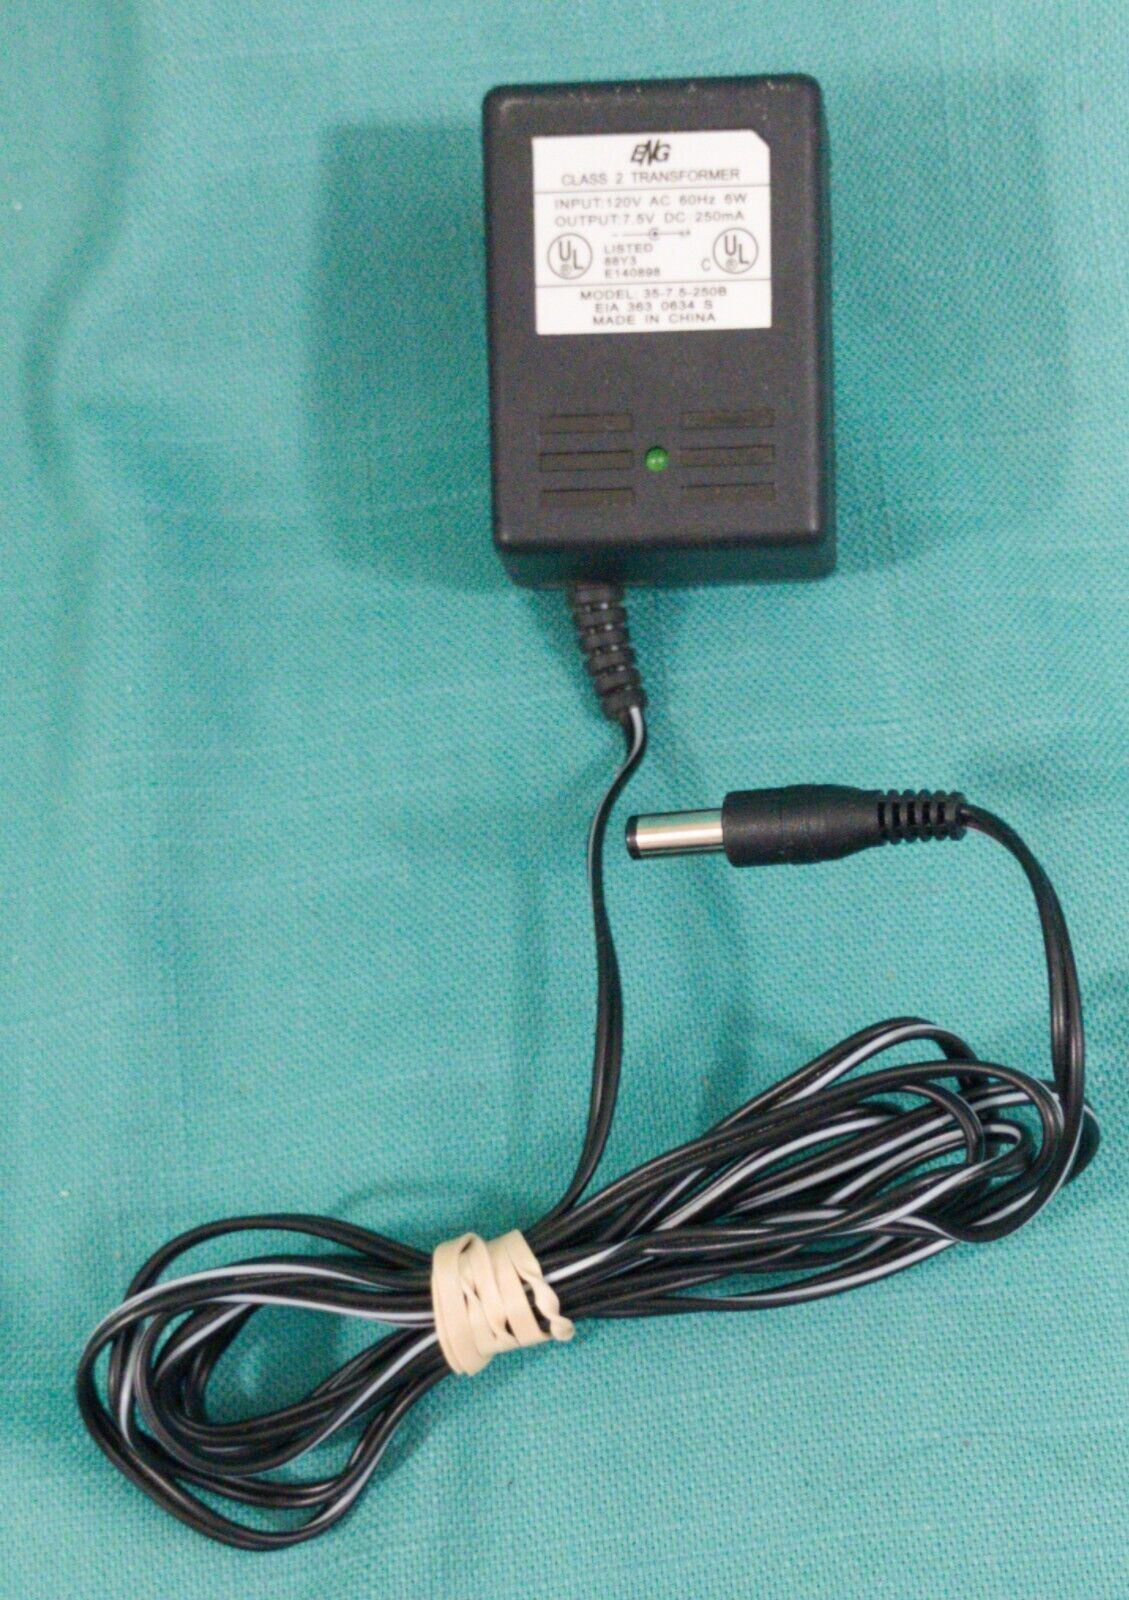 *Brand NEW*7.5V 250mA AC/DC Adapter ENG 35-7.5-250B Class 2 Transformer Wall OEM TESTED POWER Supply